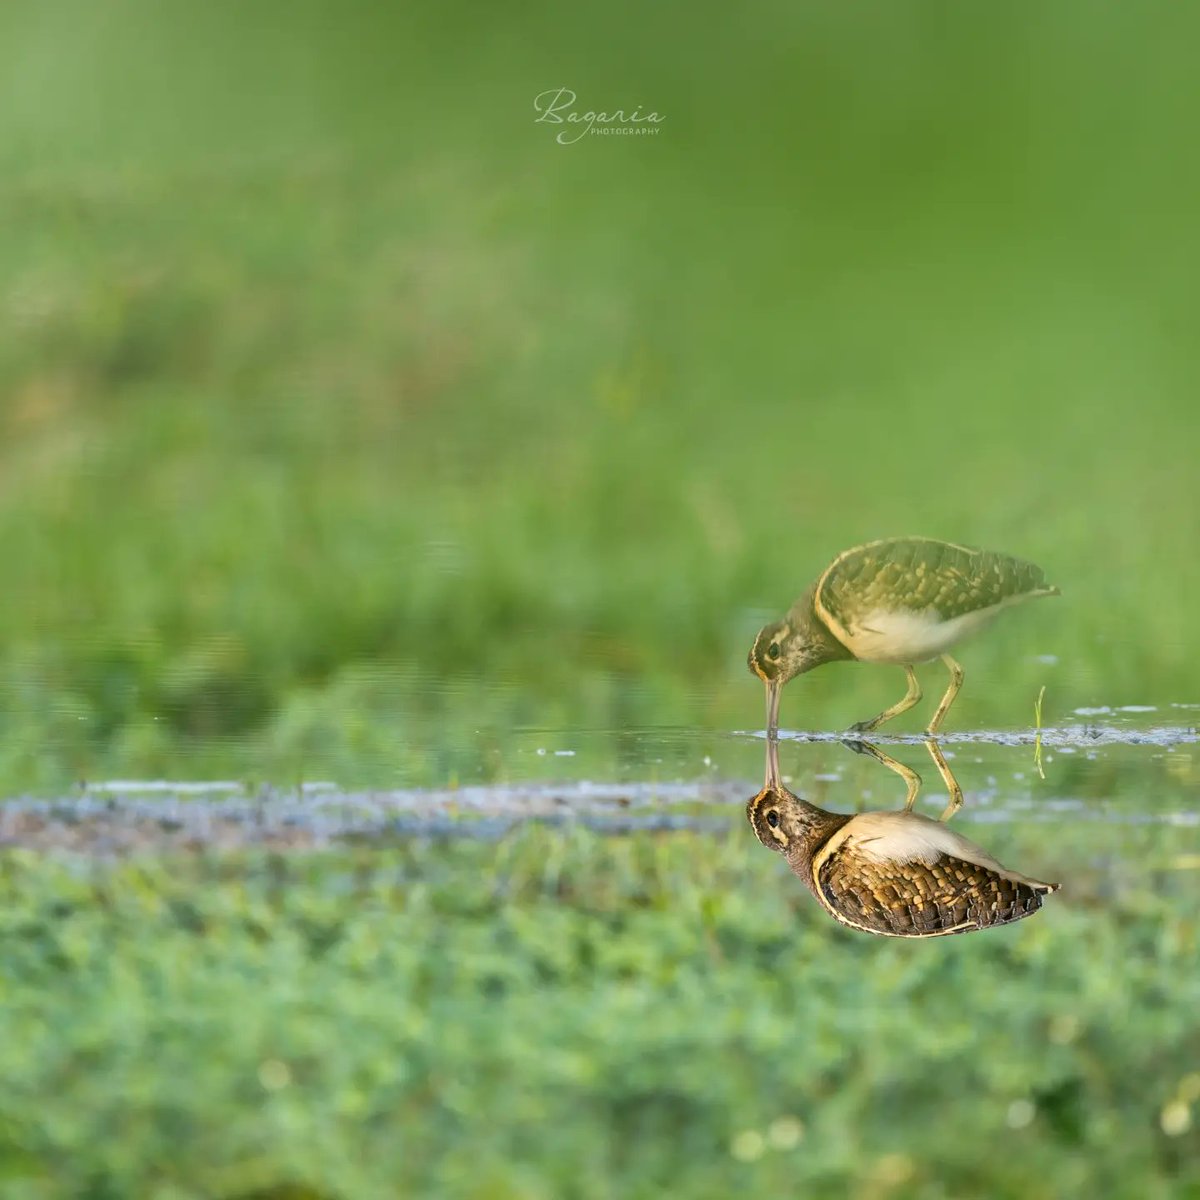 When your reflection is clearer than you and the world looks beautiful upside down! 🙃 ☺️ Wood Sandpiper and a Painted-Snipe in their morning rituals. 

📷 Shot with Canon R6 Mark II, with RF 100-500mm
#wildlifephotography #wildlifeeducation #wildvision

👉instagram.com/p/C7Jr1vzq6jI/…